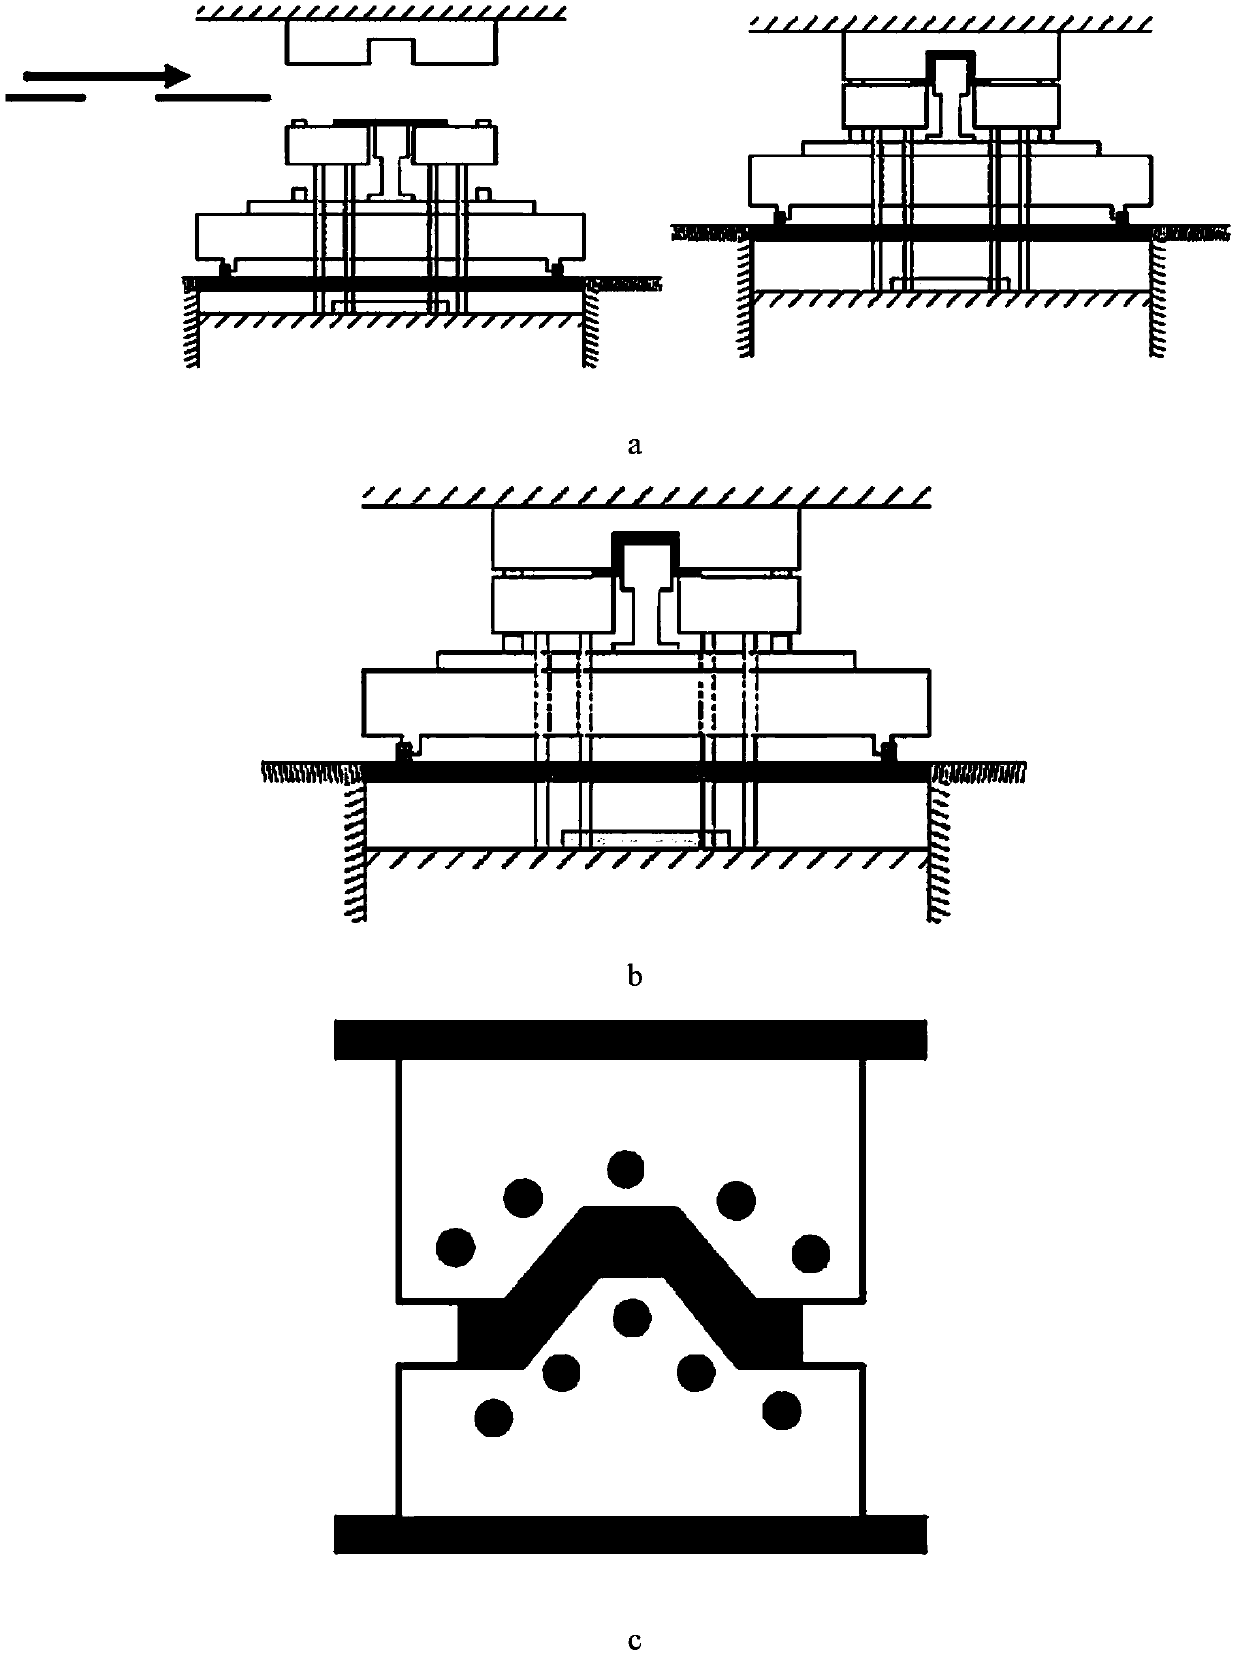 Cooling-gas direct cooling process and device based on hot forming mould of boron steel plate